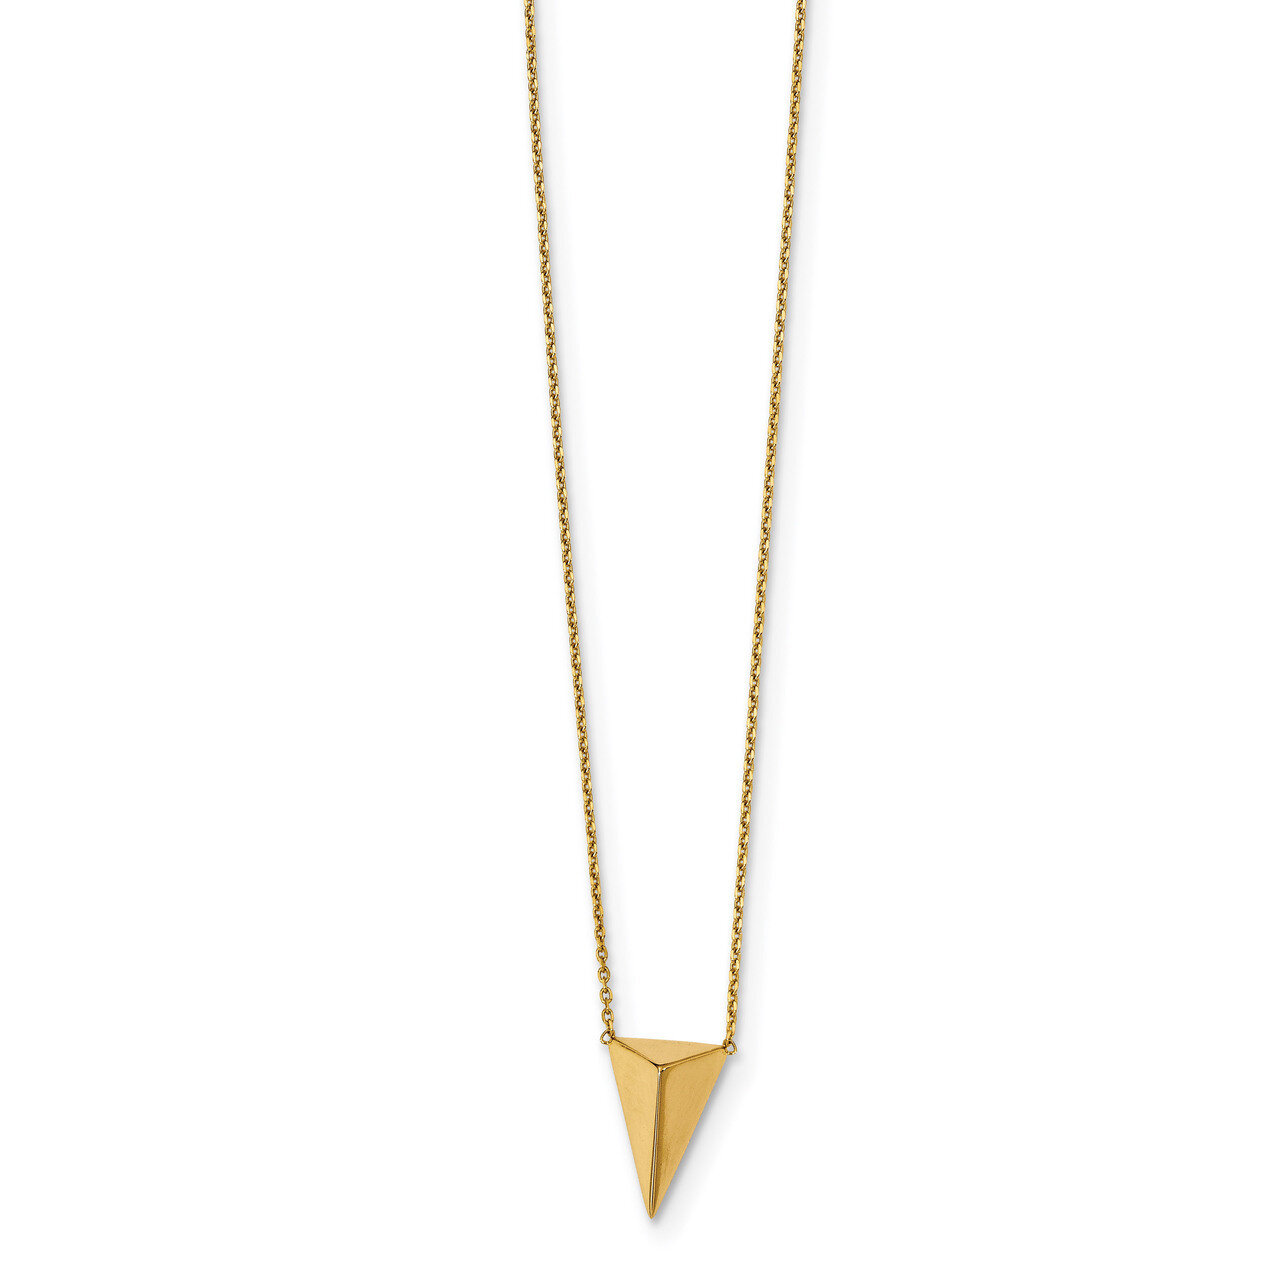 3D Triangle with 2 inch Extender Necklace 16 Inch 14k Gold Polished HB-LF1016-16